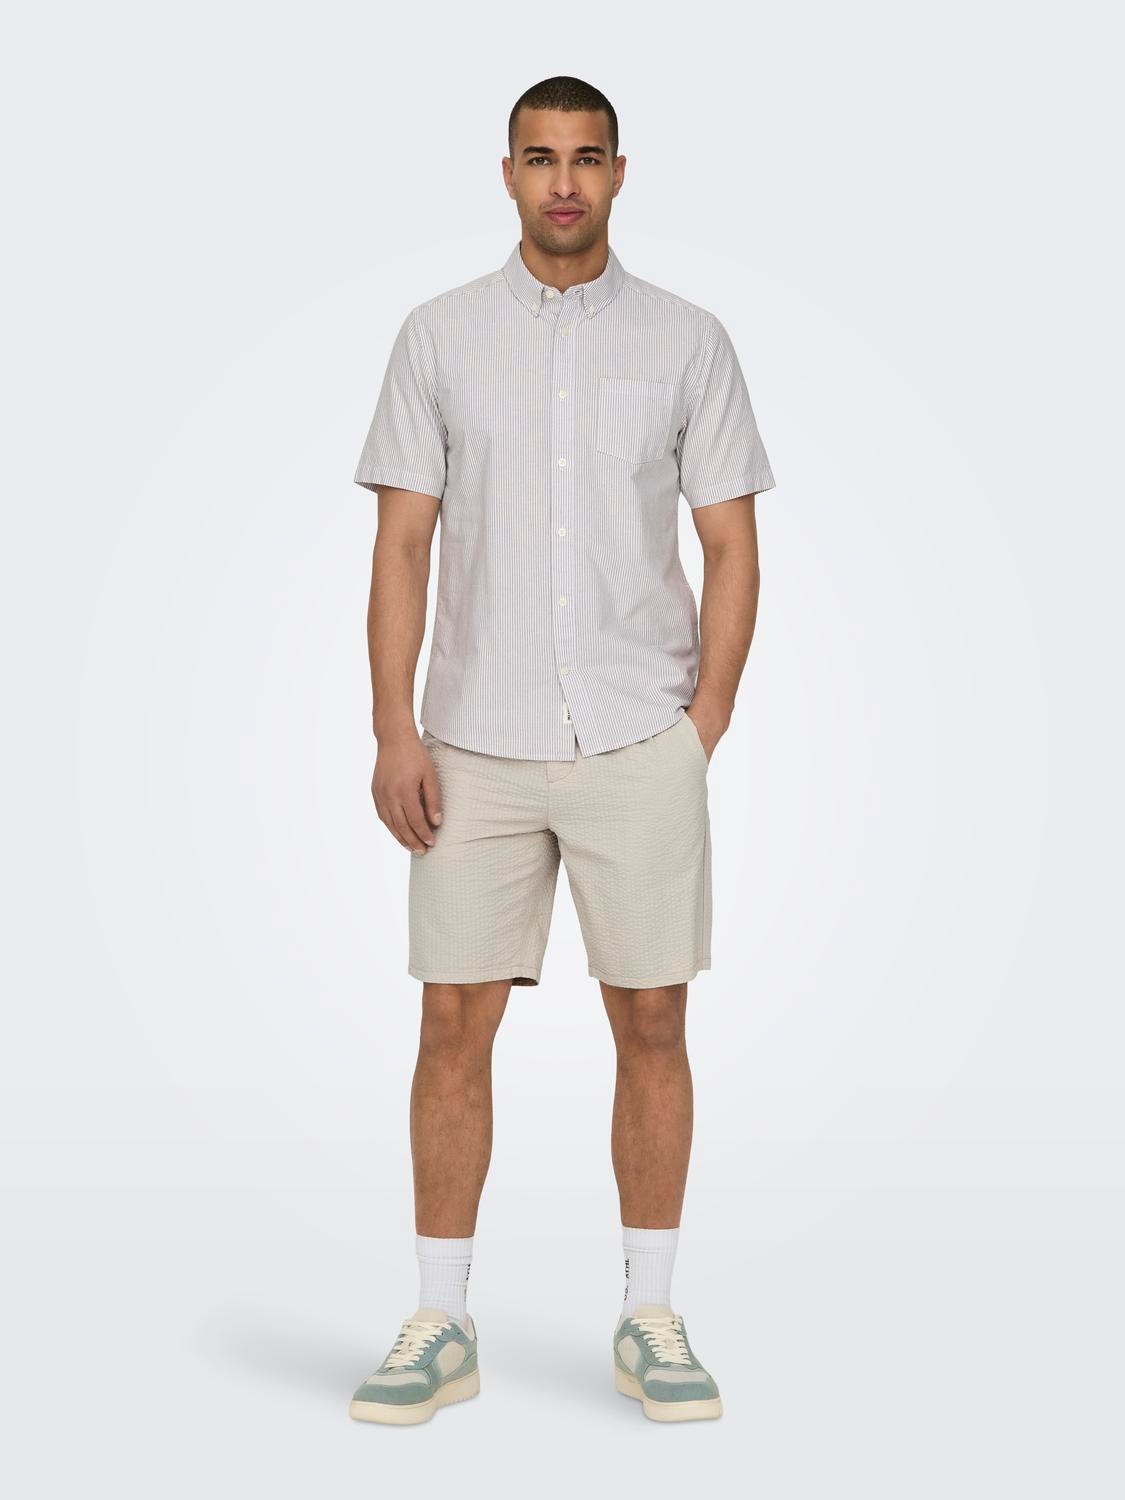 ONLY & SONS Normal geschnitten Shorts -Silver Lining - 22028301